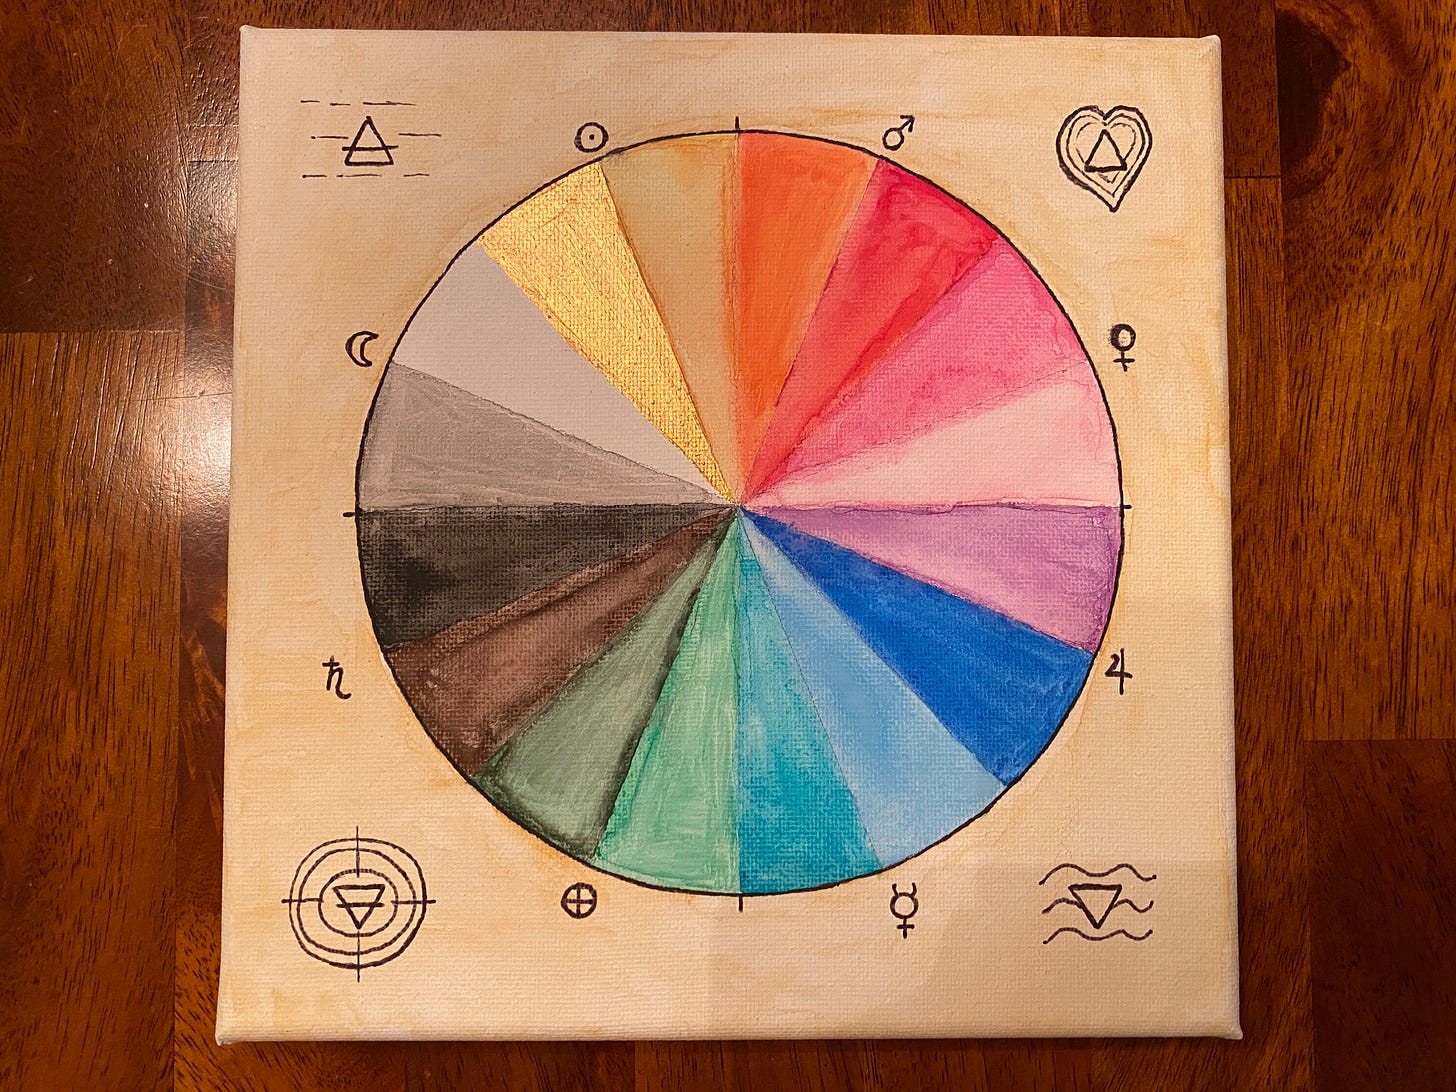 A color wheel surrounded by alchemical symbols